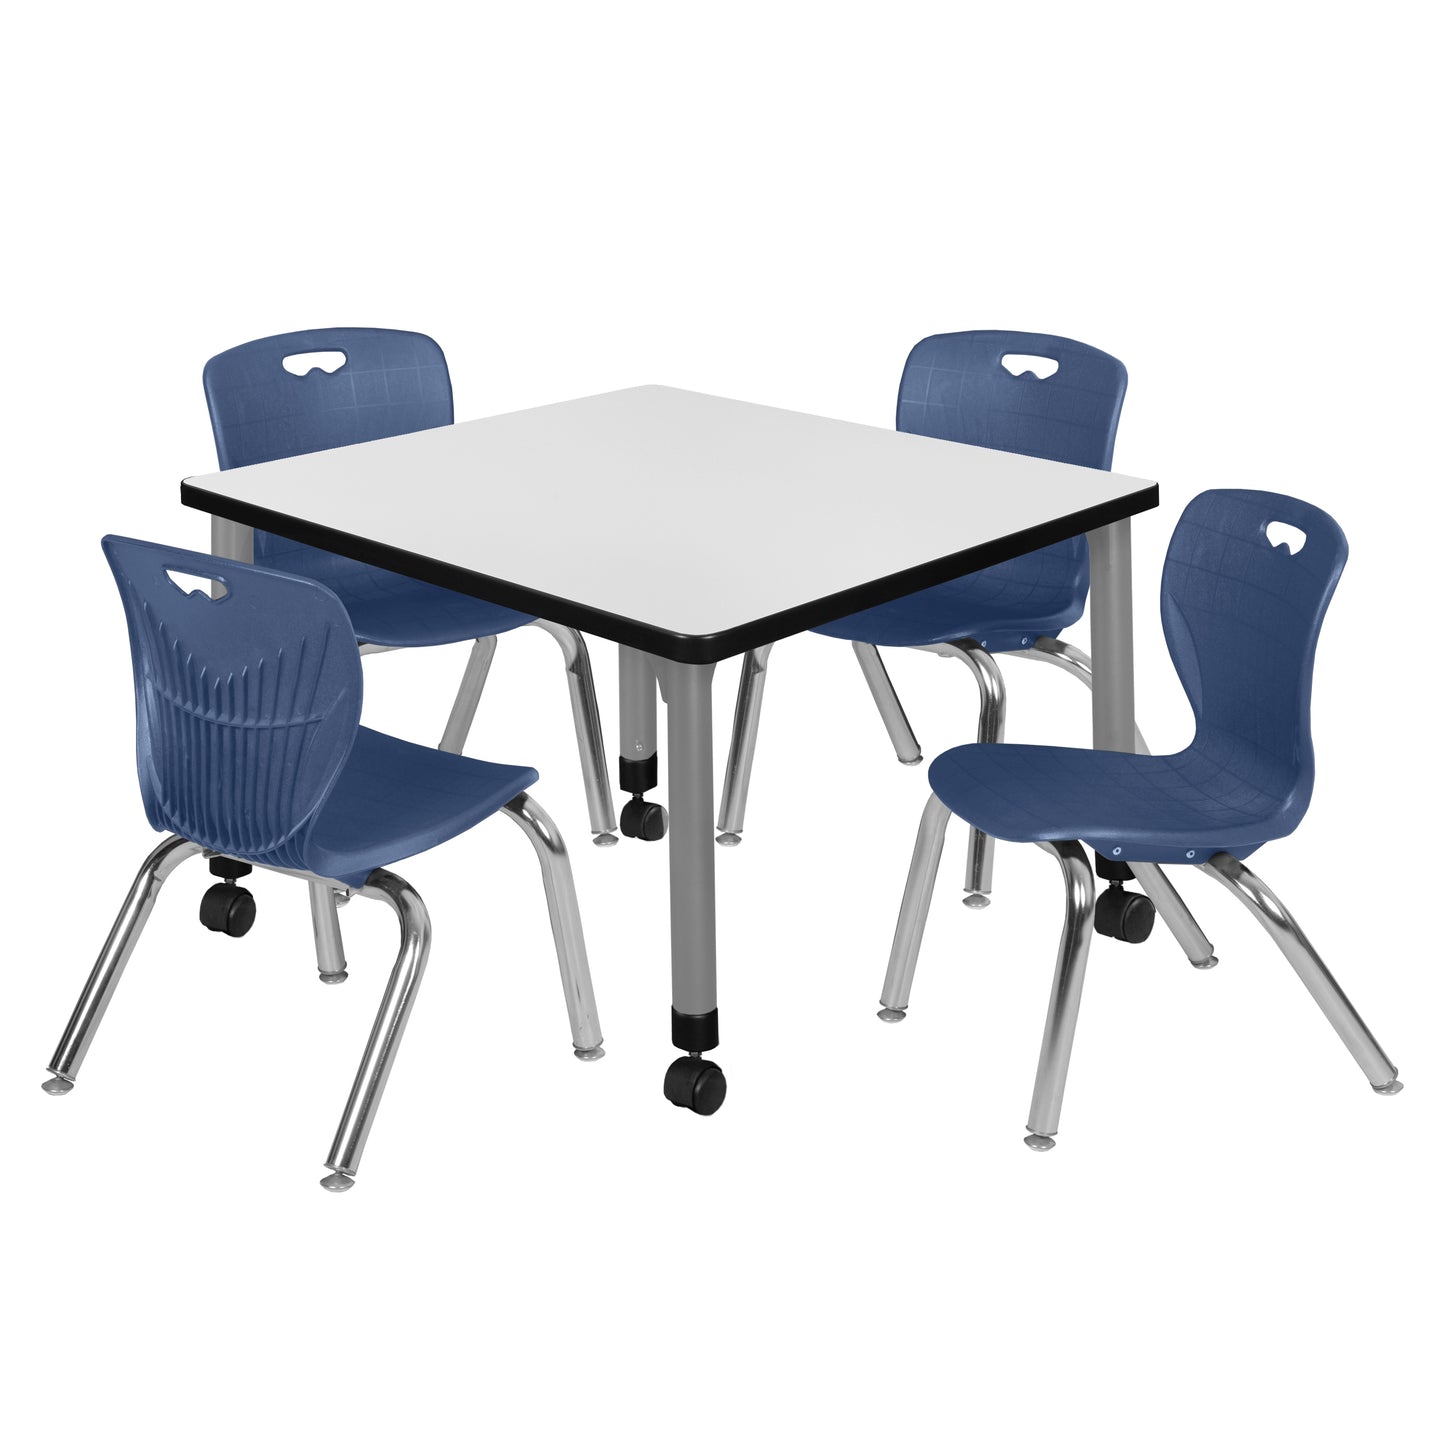 Regency Kee 30 in. Square Adjustable Classroom Table & 4 Andy 12 in. Stack Chairs